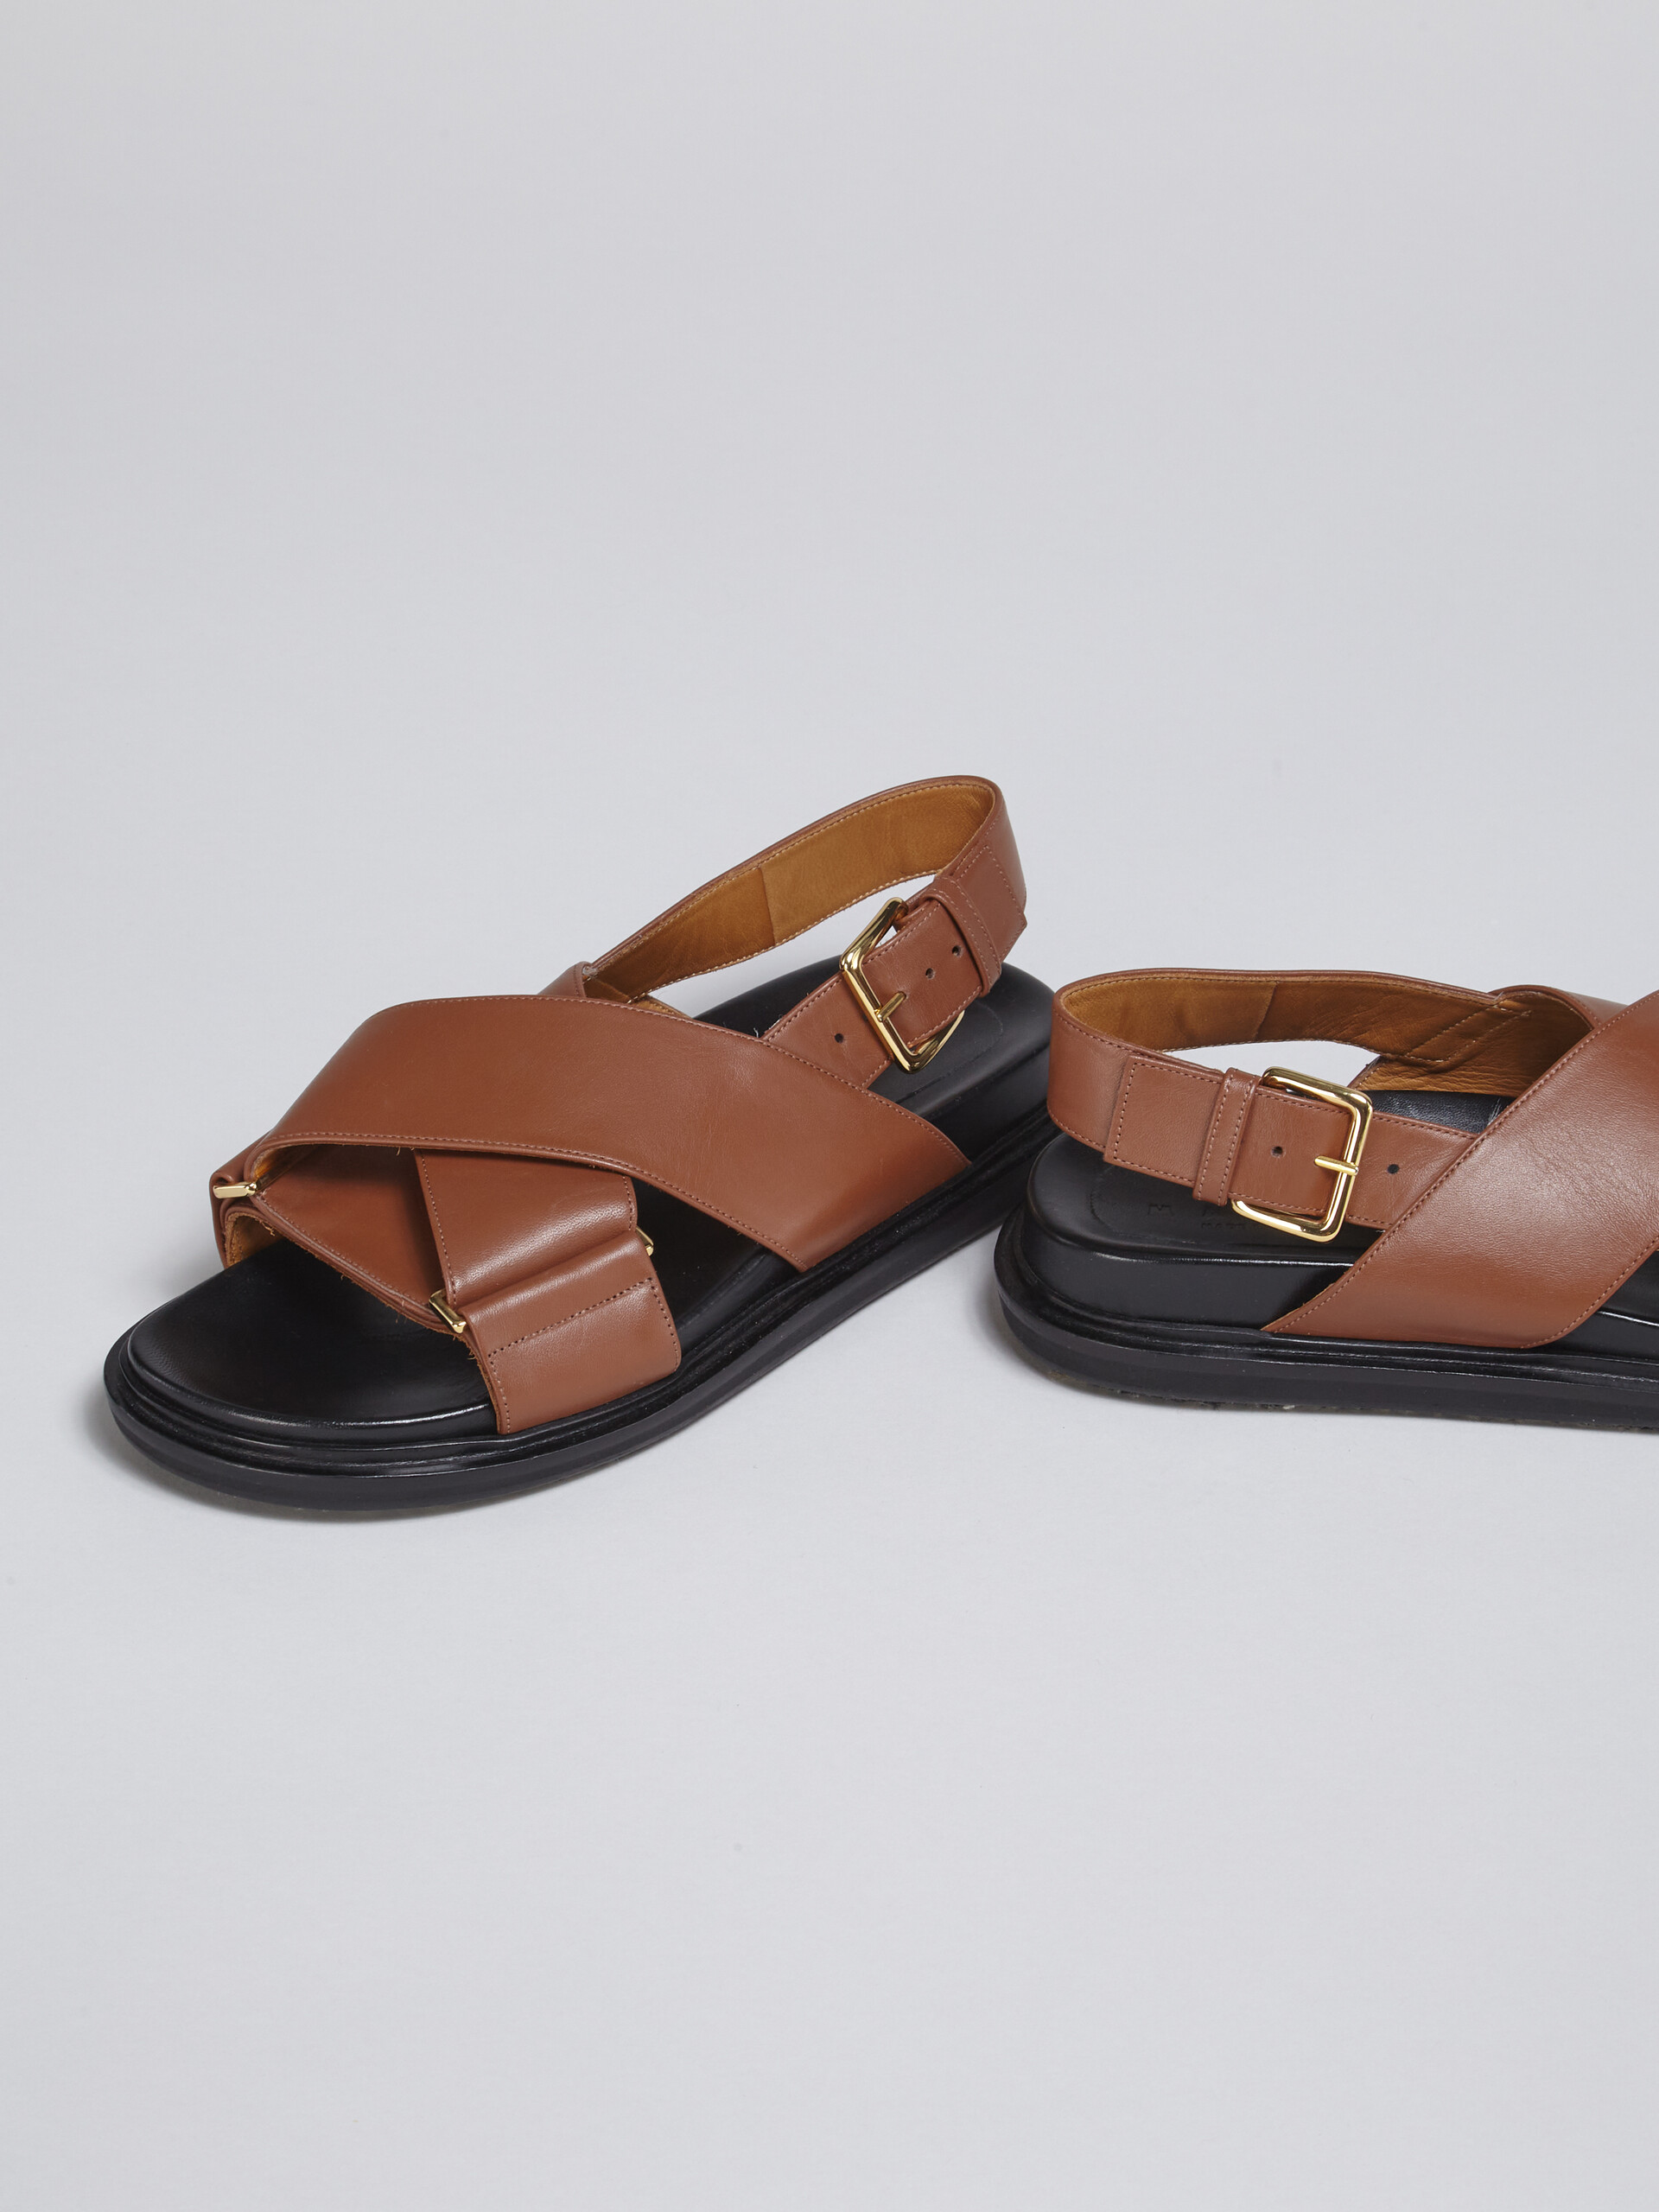 Brown smooth calf leather fussbett - Sandals - Image 5